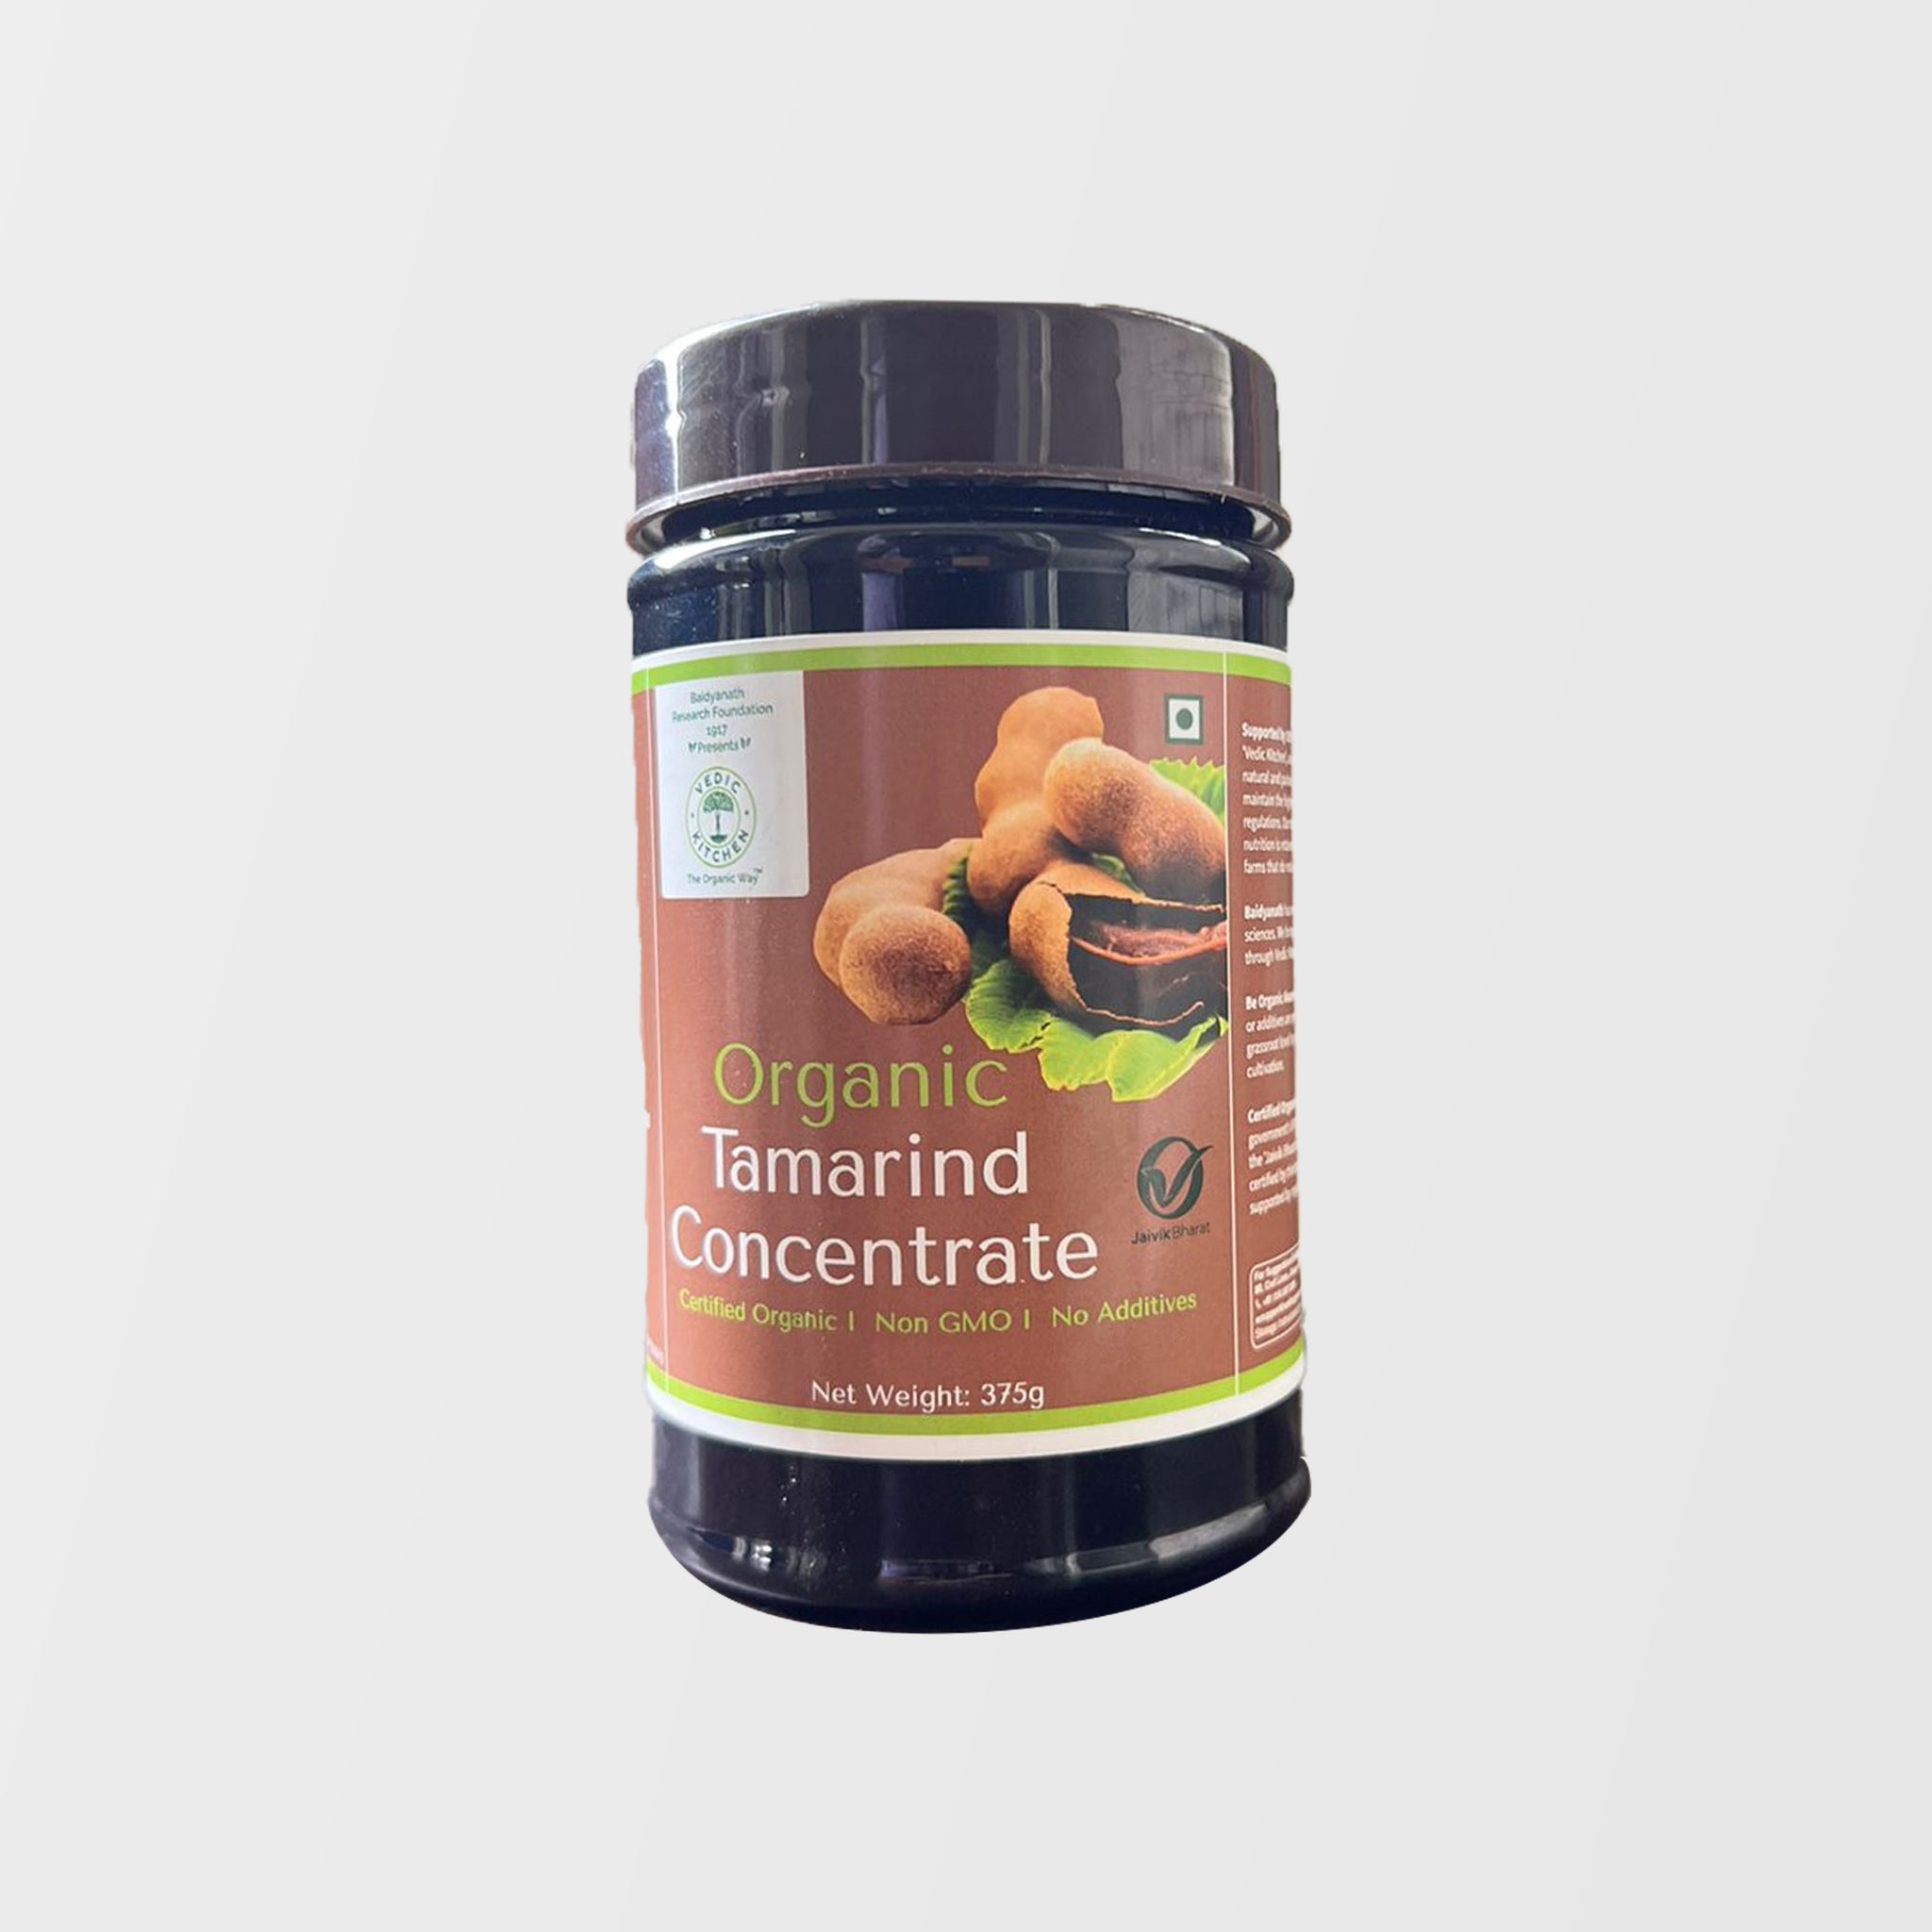 Organic Tamarind Concentrate 375g